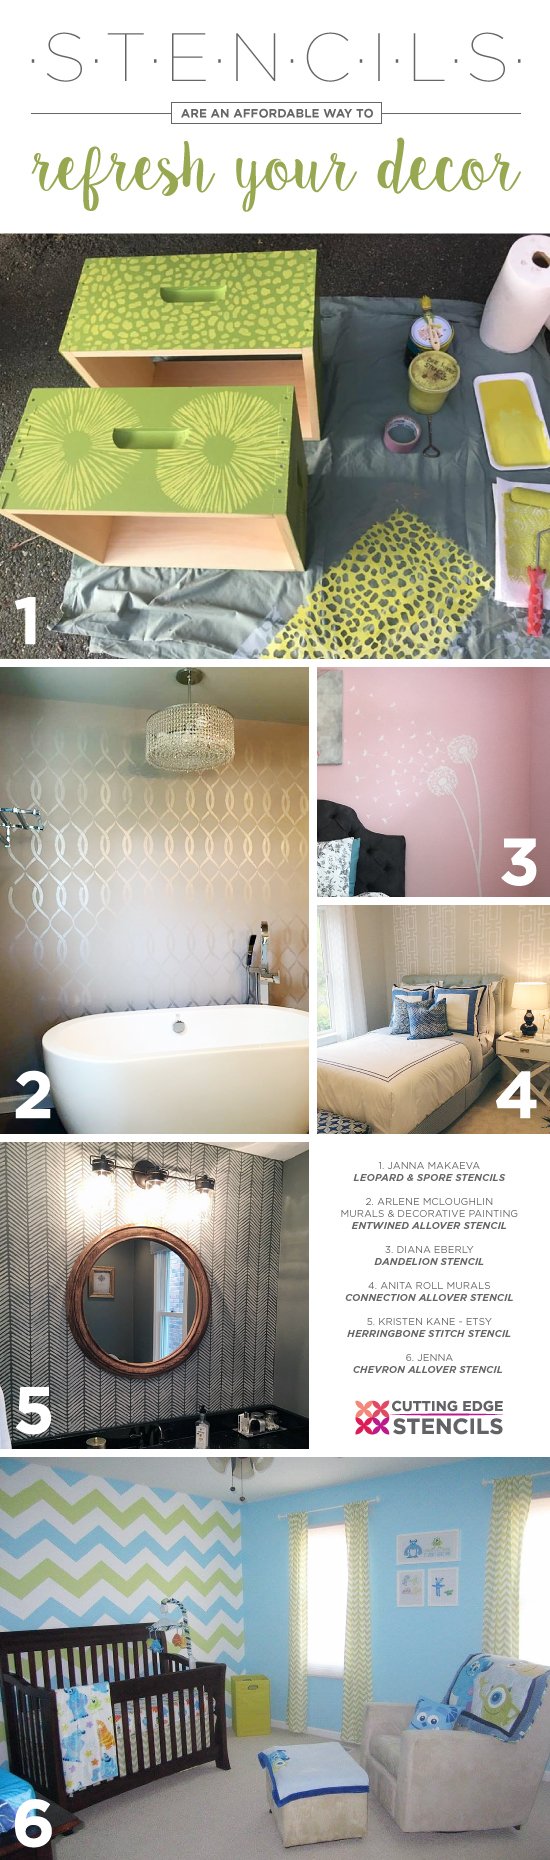 Cutting Edge Stencils shares DIY home decorating ideas using wall and craft stencil patterns. http://www.cuttingedgestencils.com/stencil-patterns-featured-stencils.html